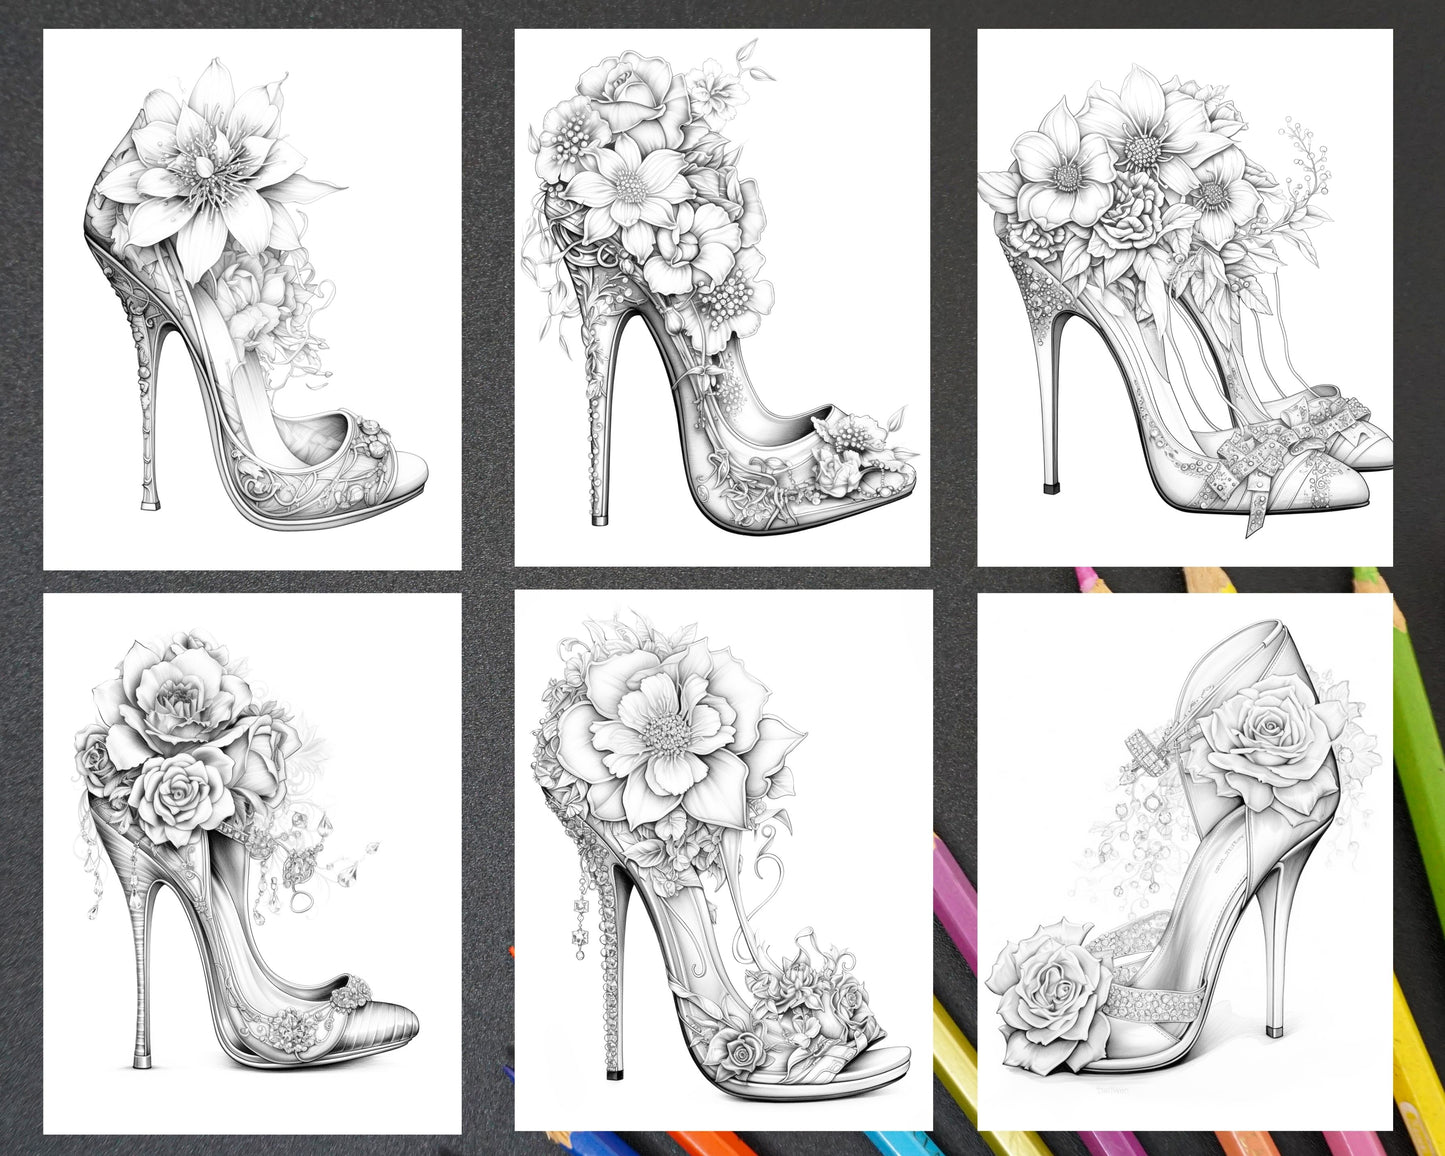 Wedding Flower Shoes Grayscale Coloring Page, Printable Adult Coloring Sheet, Floral Shoe Coloring Illustration, Wedding Coloring Book Artwork, Grayscale Flower Design Image